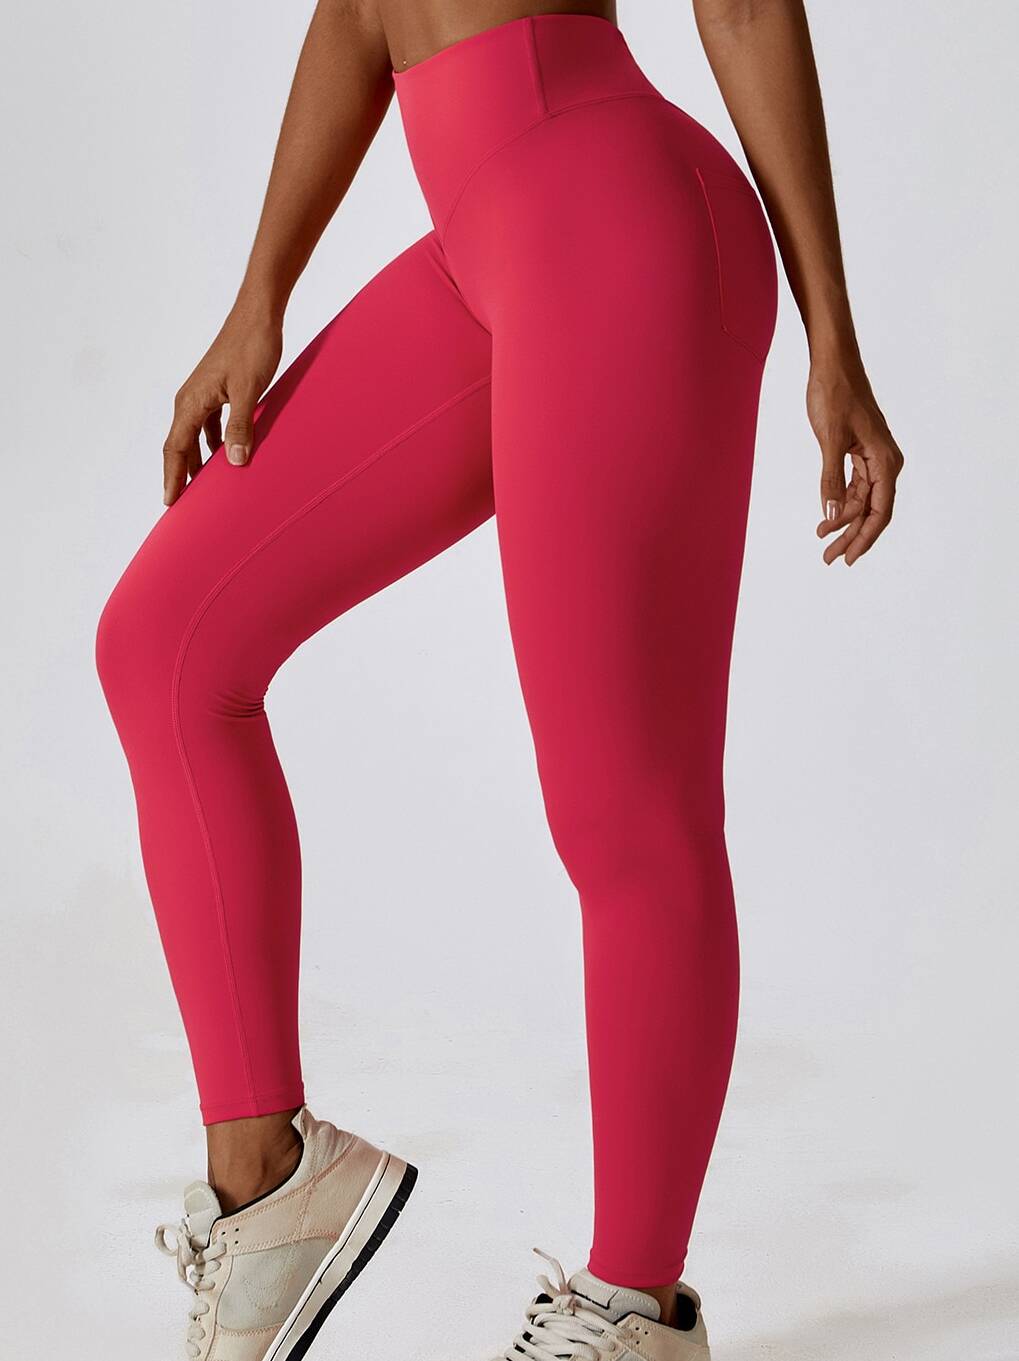 https://valueyoga.co/wp-content/uploads/2023/08/Turn-heads-and-show-off-your-curves-with-these-ultra-flattering-Pockets-High-Waist-Scrunch-Butt-Leggings-Featuring-a-high-rise-waist-and-a-contouring-fit-these-leggings-are-designed-to-hug-your-curves-e1692037905277.jpg